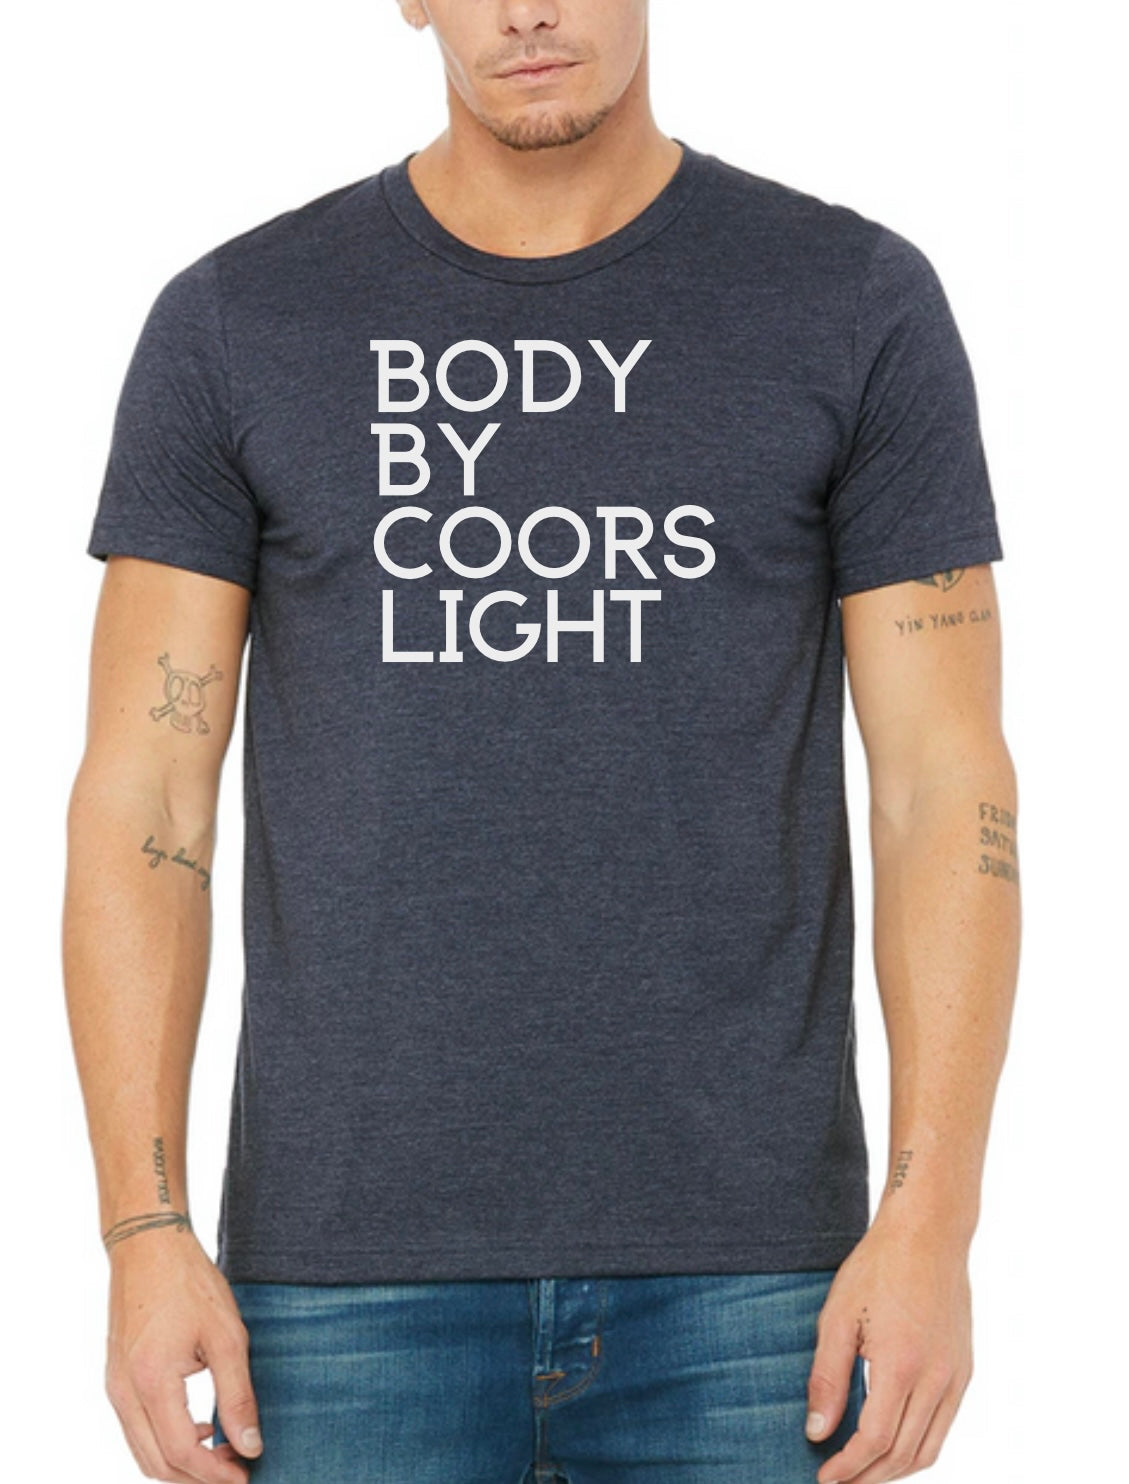 Body By Coors Light Tee